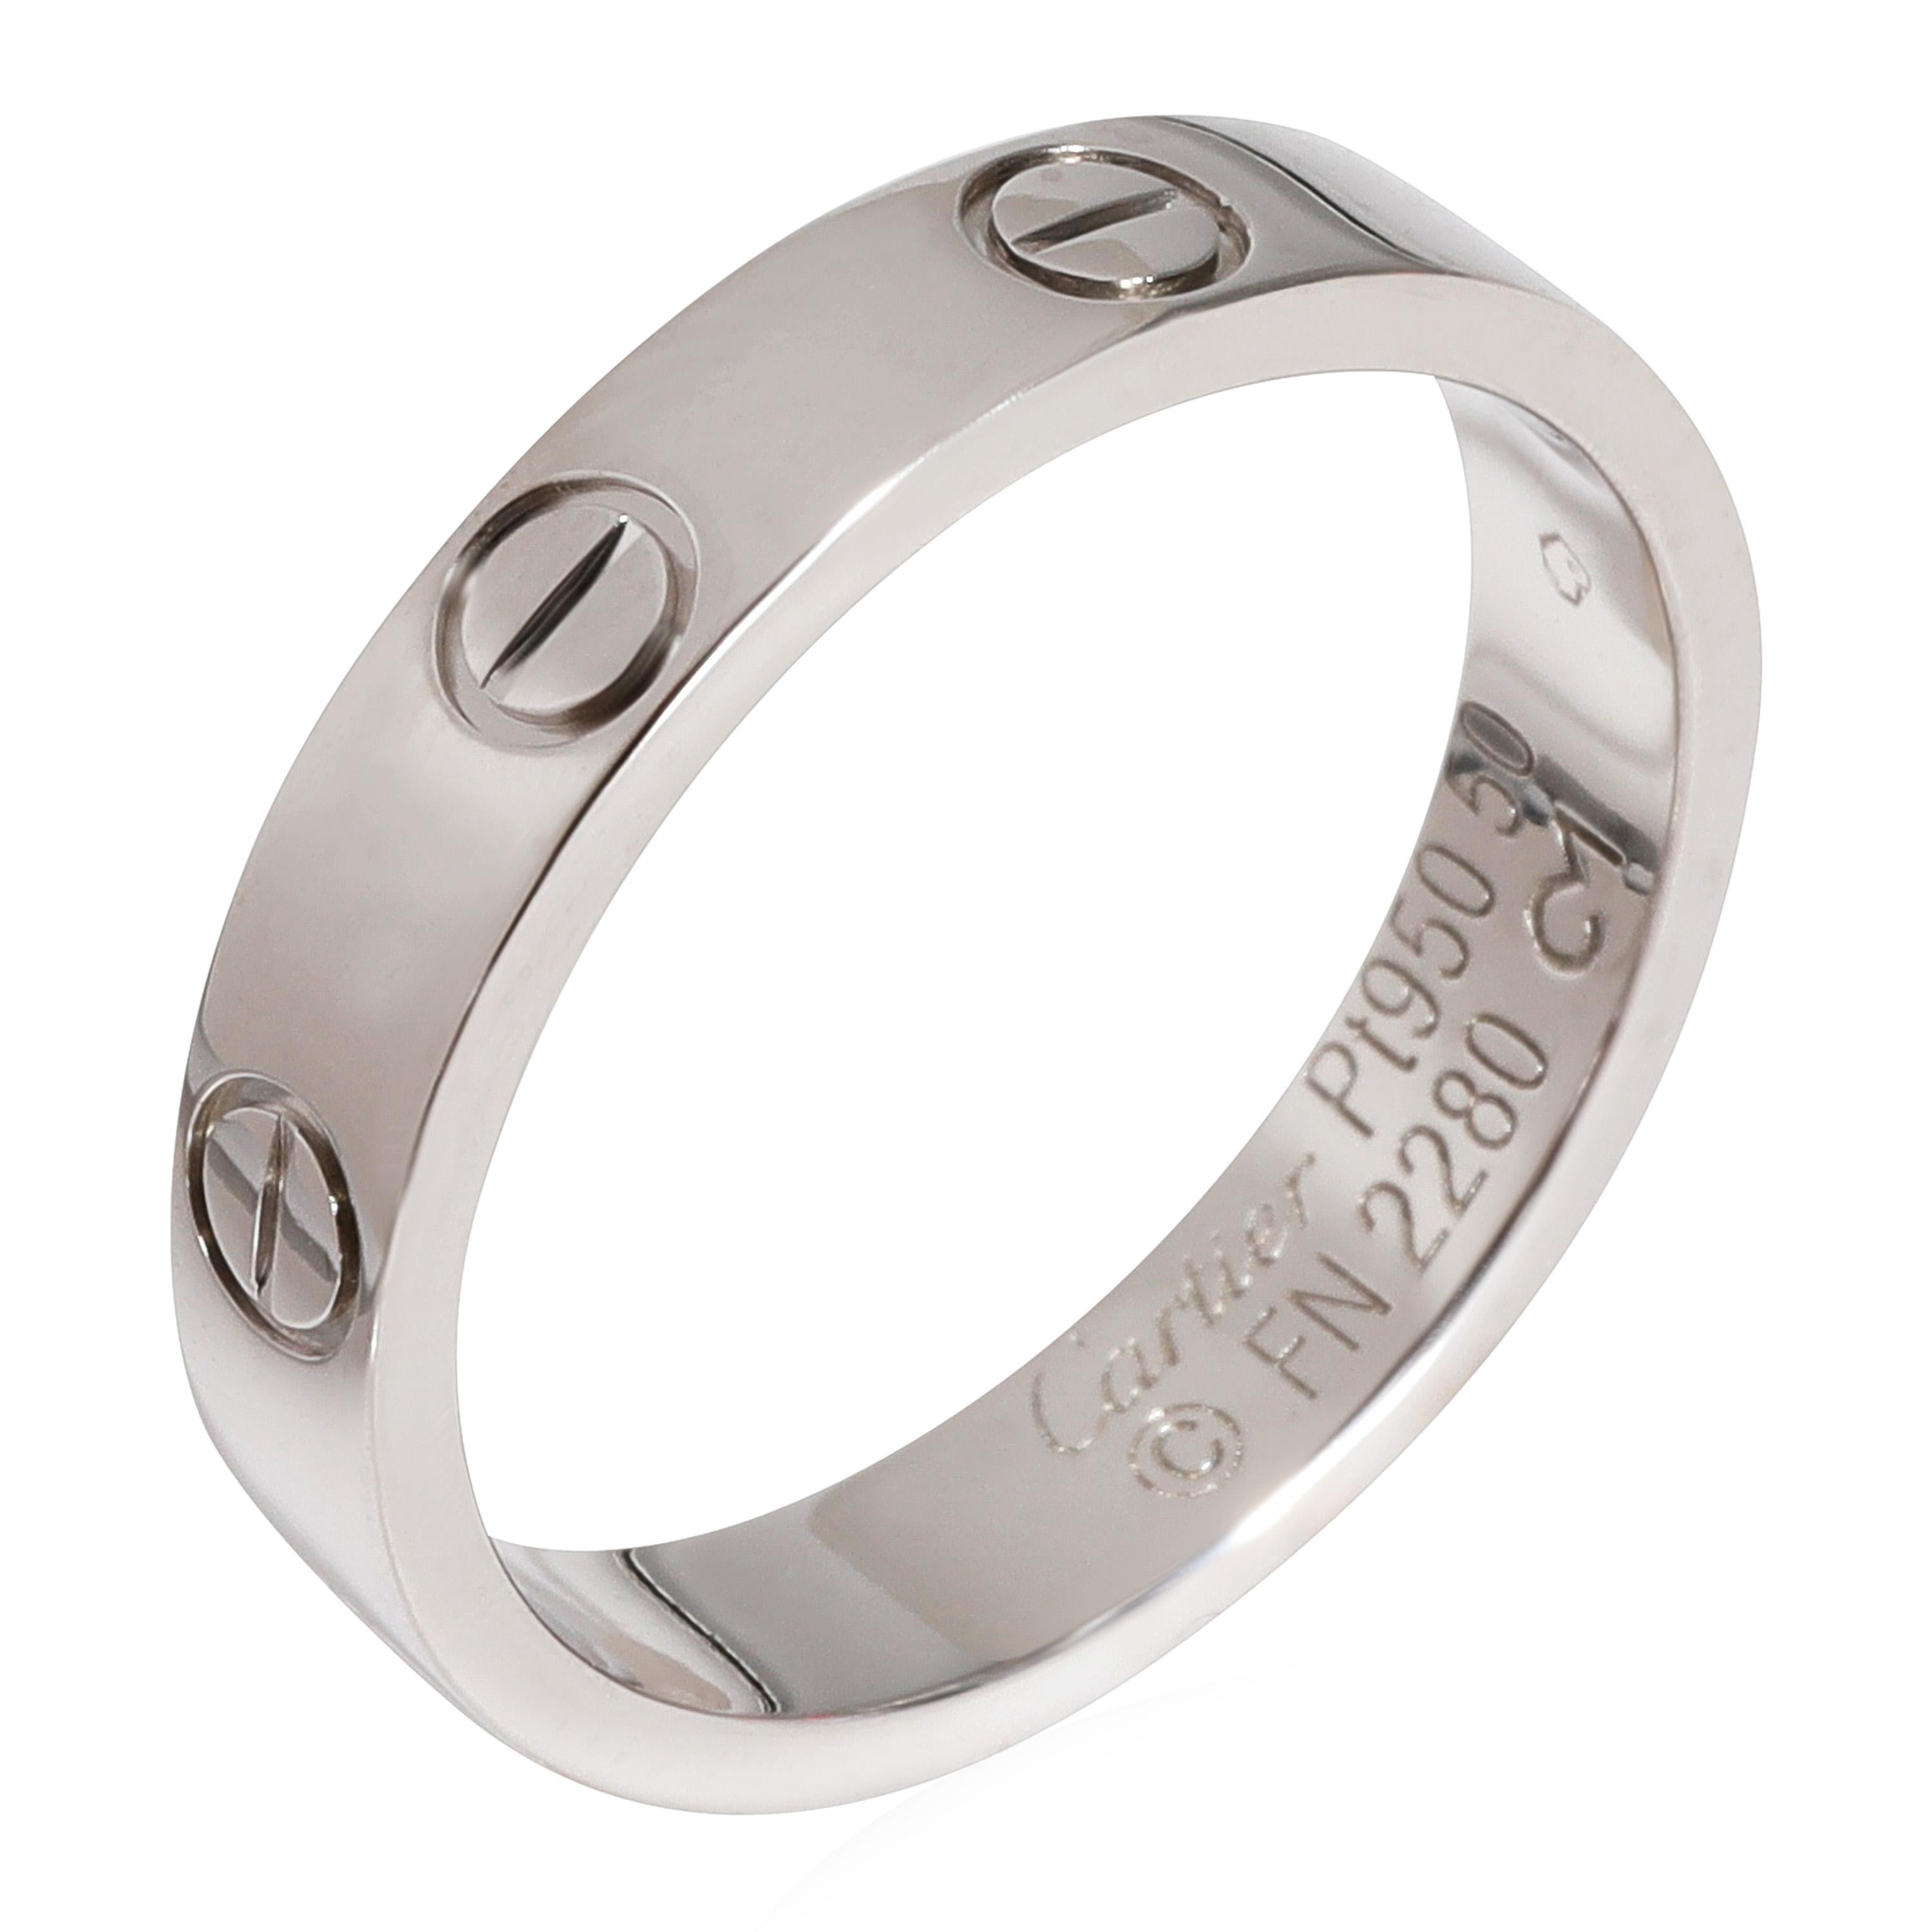 Cartier Love Wedding Band in 950 Platinum

PRIMARY DETAILS
SKU: 122342
Listing Title: Cartier Love Wedding Band in 950 Platinum
Condition Description: Retails for 2620 USD. In excellent condition and recently polished. Ring size is 5.25.
Brand: